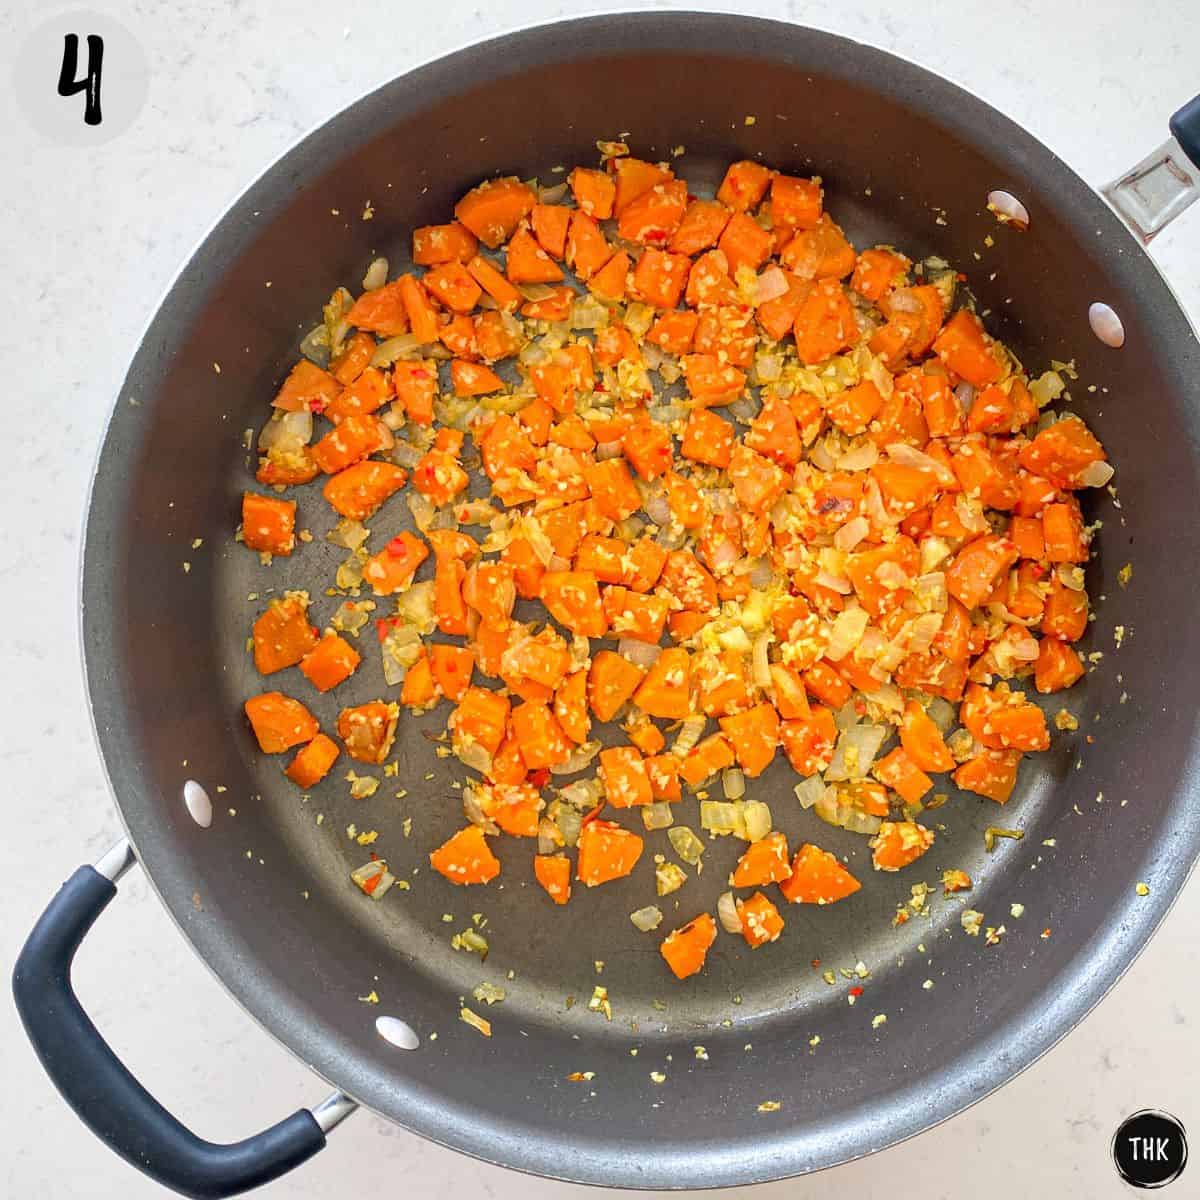 Sautéed carrot, onion and garlic in large skillet.